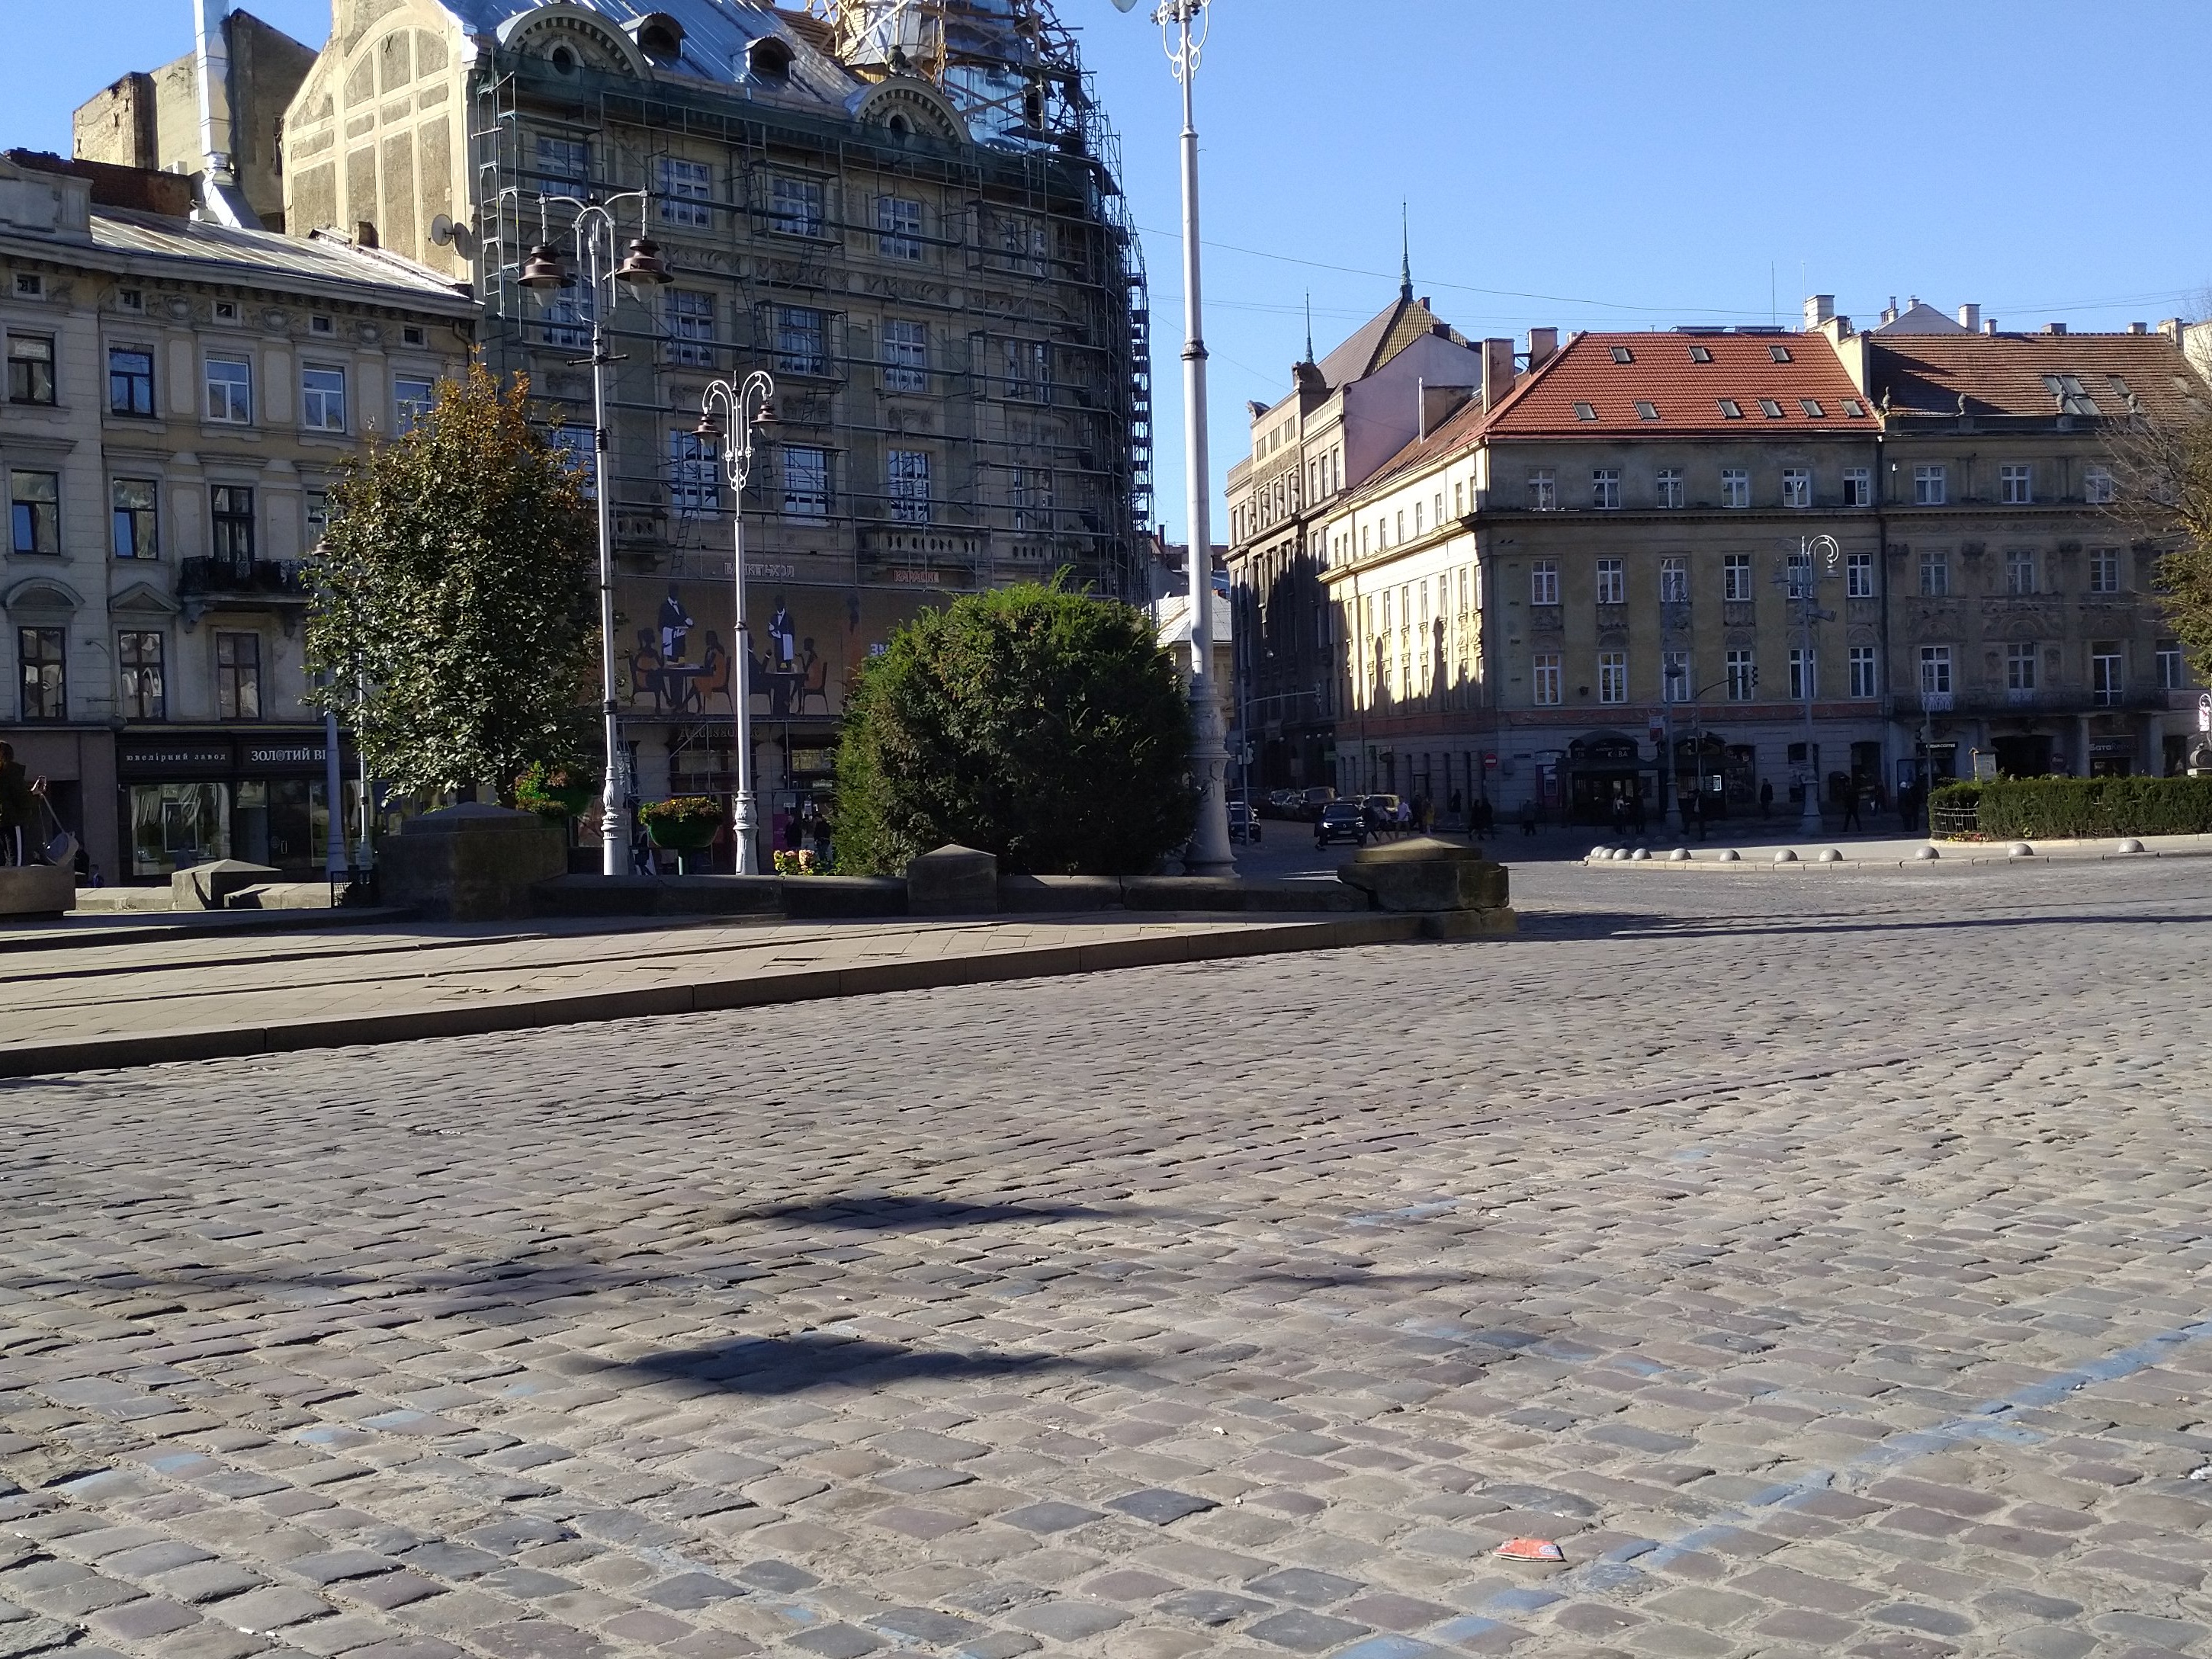 Tour of the Central Archive of History in Lvovi. Square in Lvov rephoto